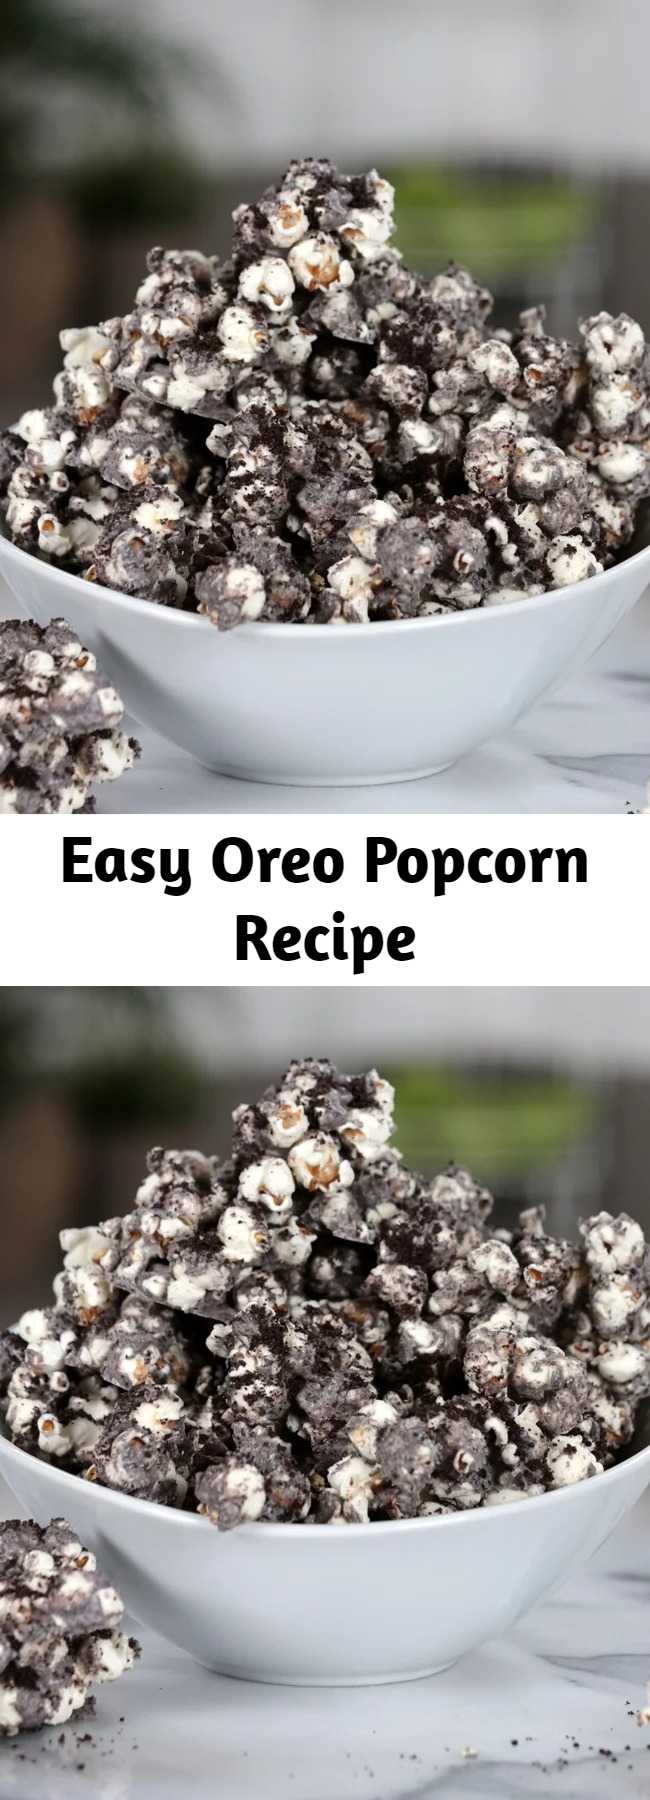 Easy Oreo Popcorn Recipe - Your snacking just got a whole lot better with this easy upgrade for regular old popcorn. With a cookies and cream coating and crushed Oreos on top, this popcorn is a heavenly pairing with a good Summer blockbuster.